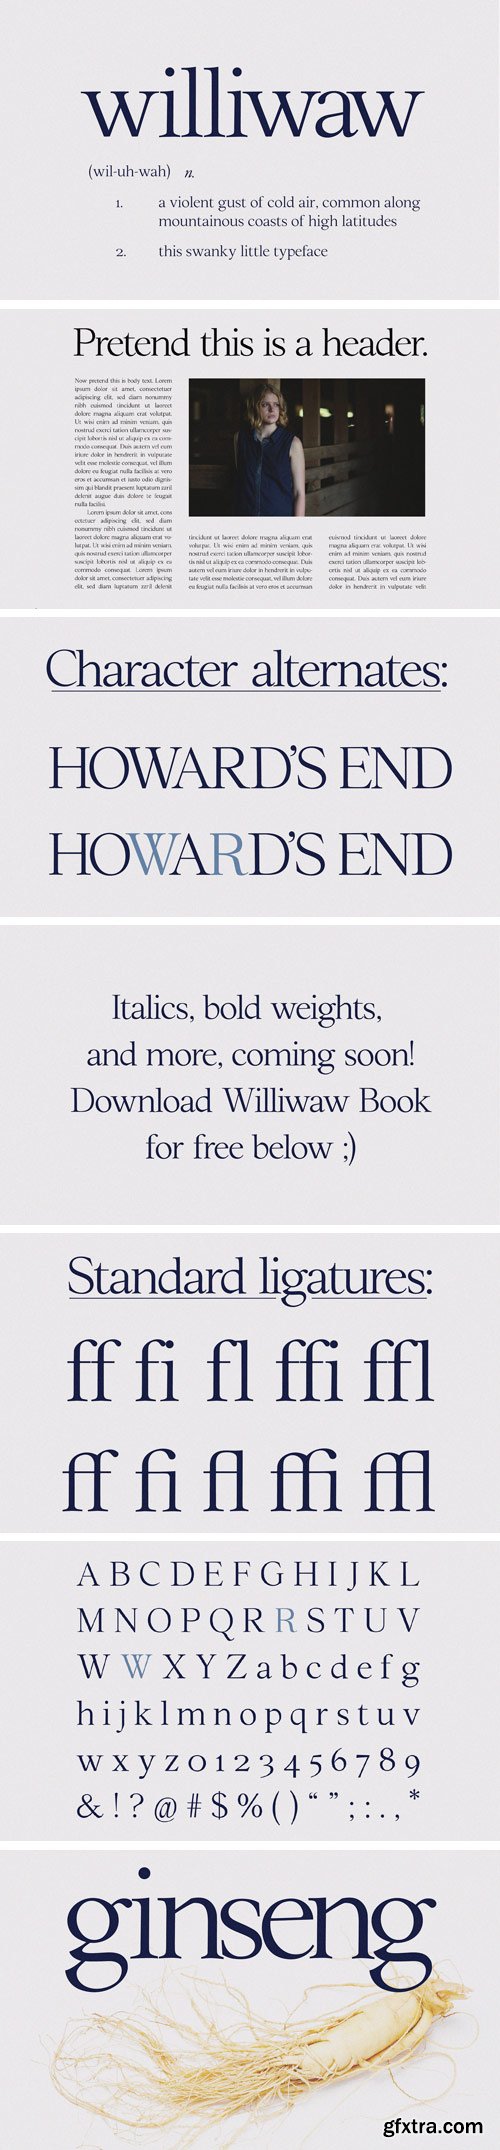 Williwaw Book Typeface